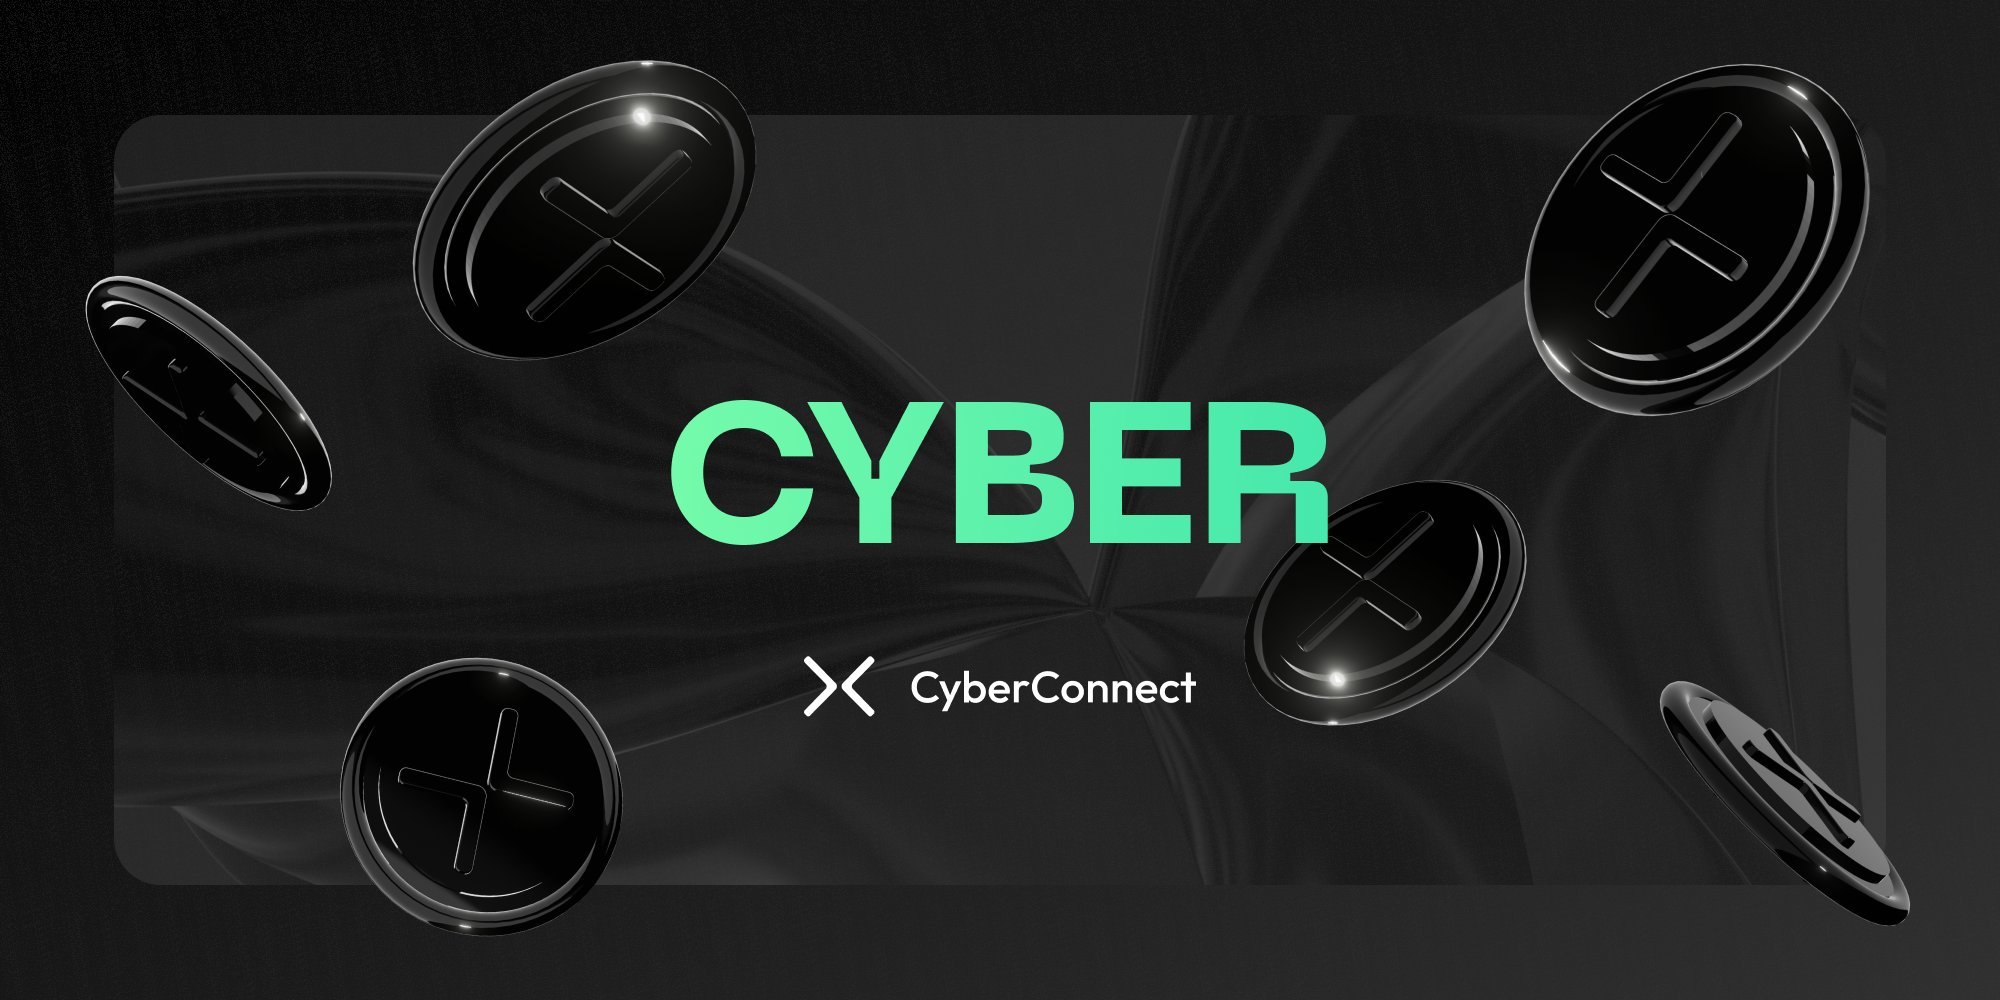 CyberConnect